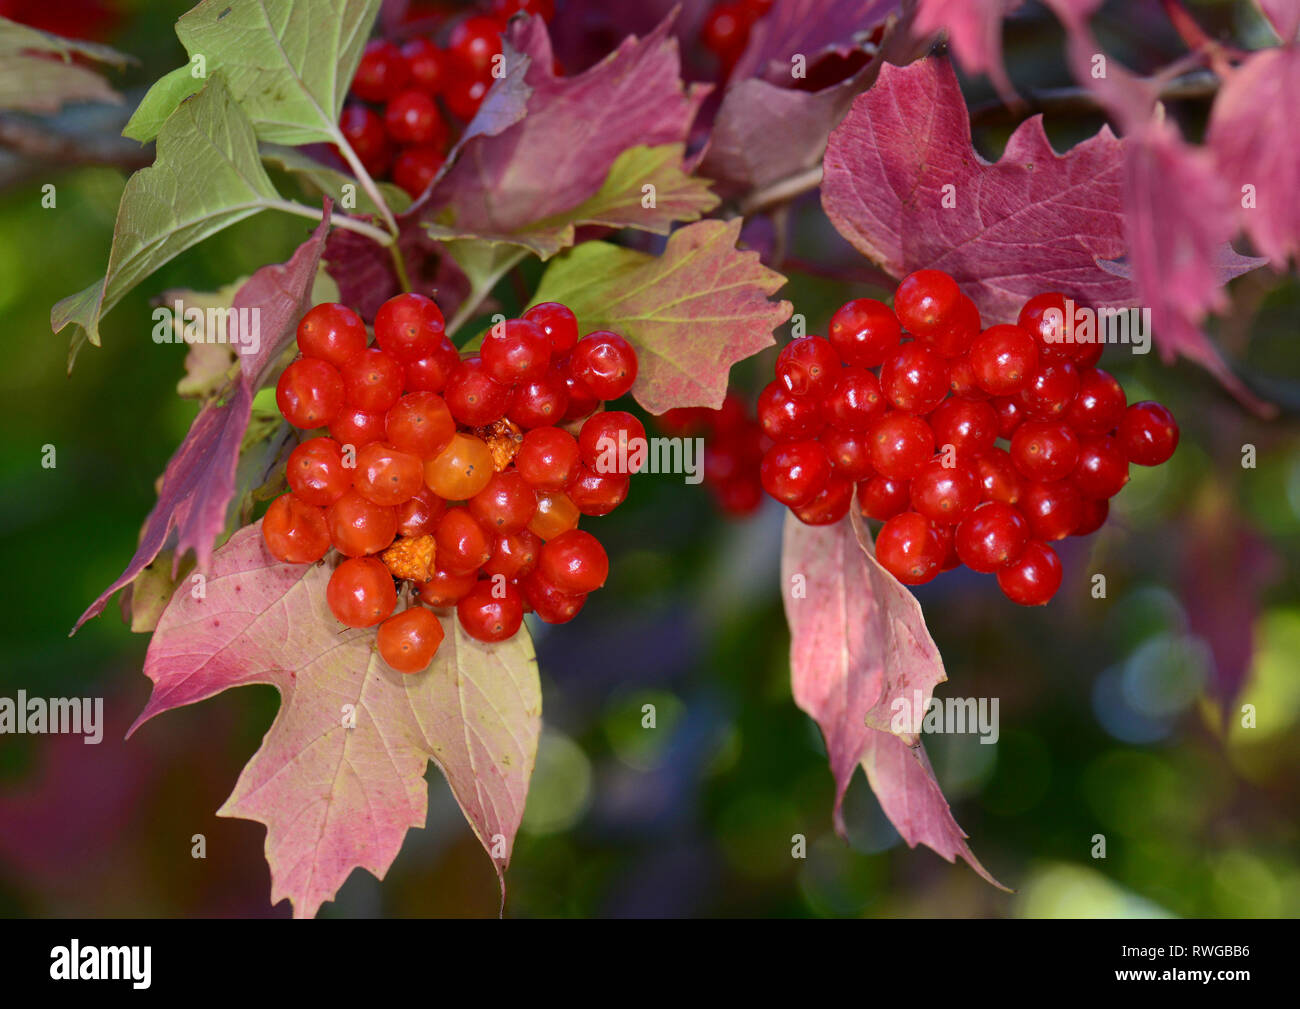 European Cranberry Bush, Snowball Tree, Guelder Rose (Viburnum opulus). Twig with ripe berries in autumn, Germany Stock Photo